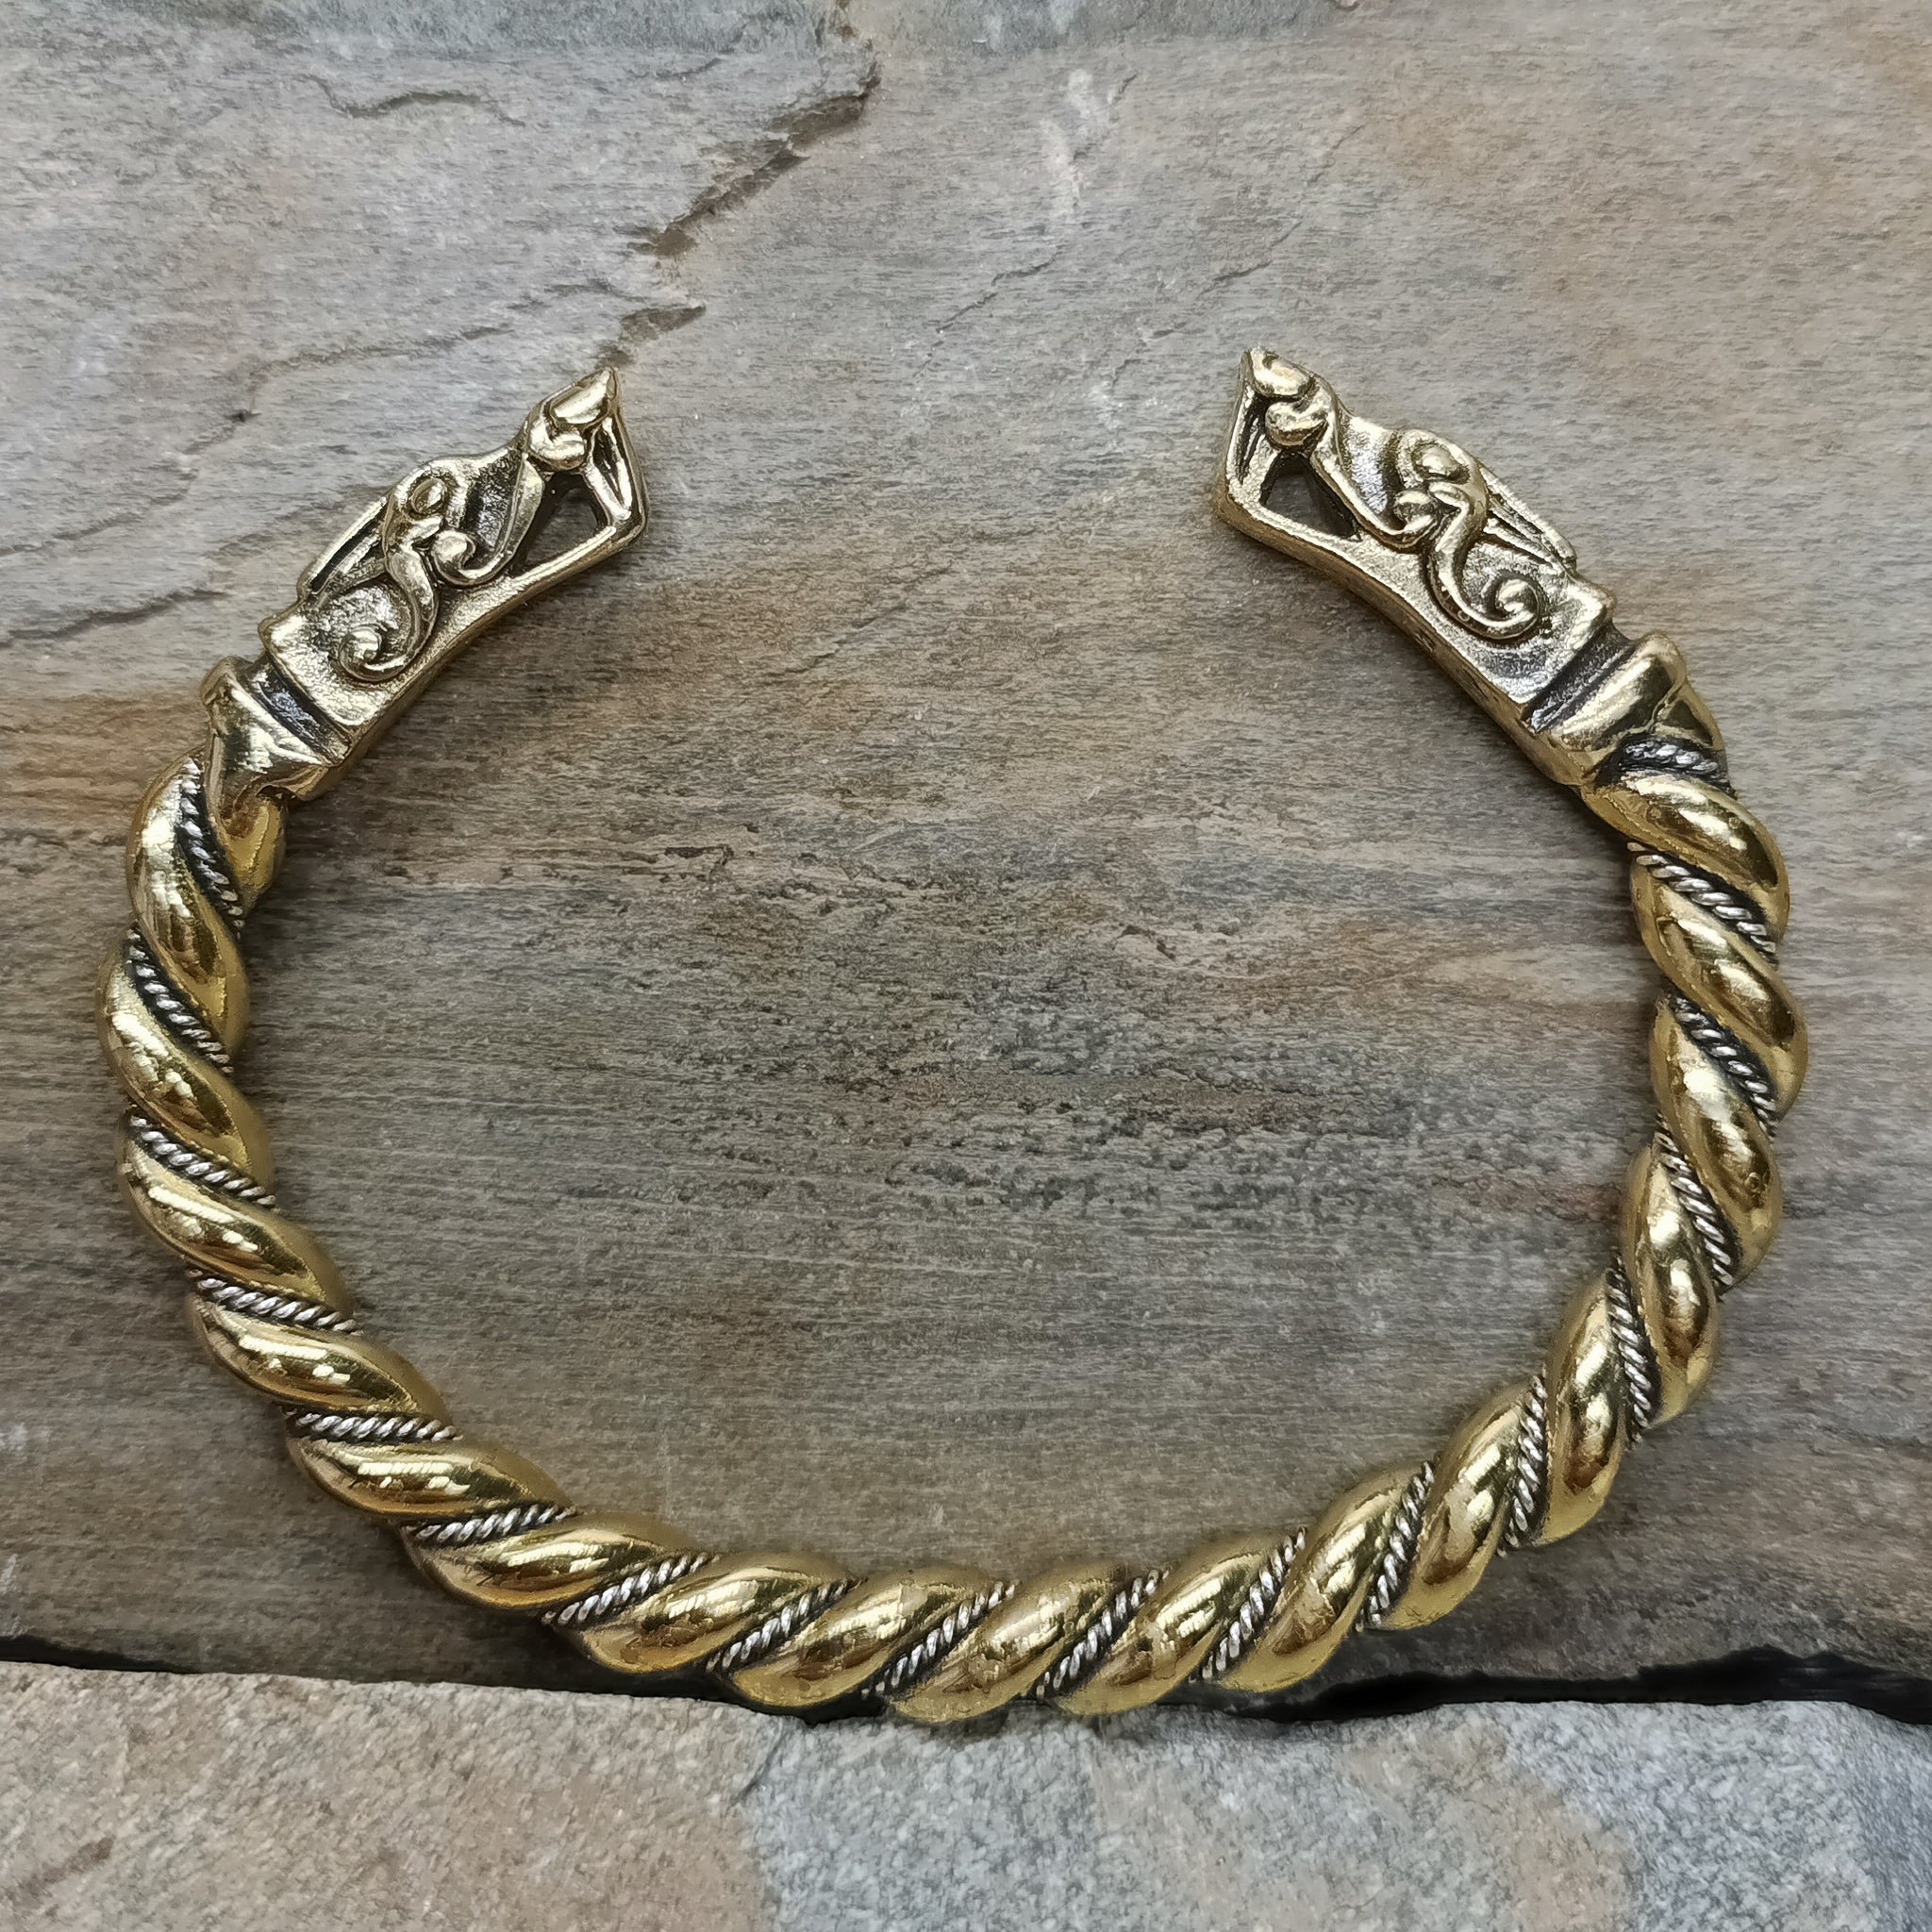 Twisted Bronze and Silver Bracelet With Gotlandic Dragon Heads on Rock